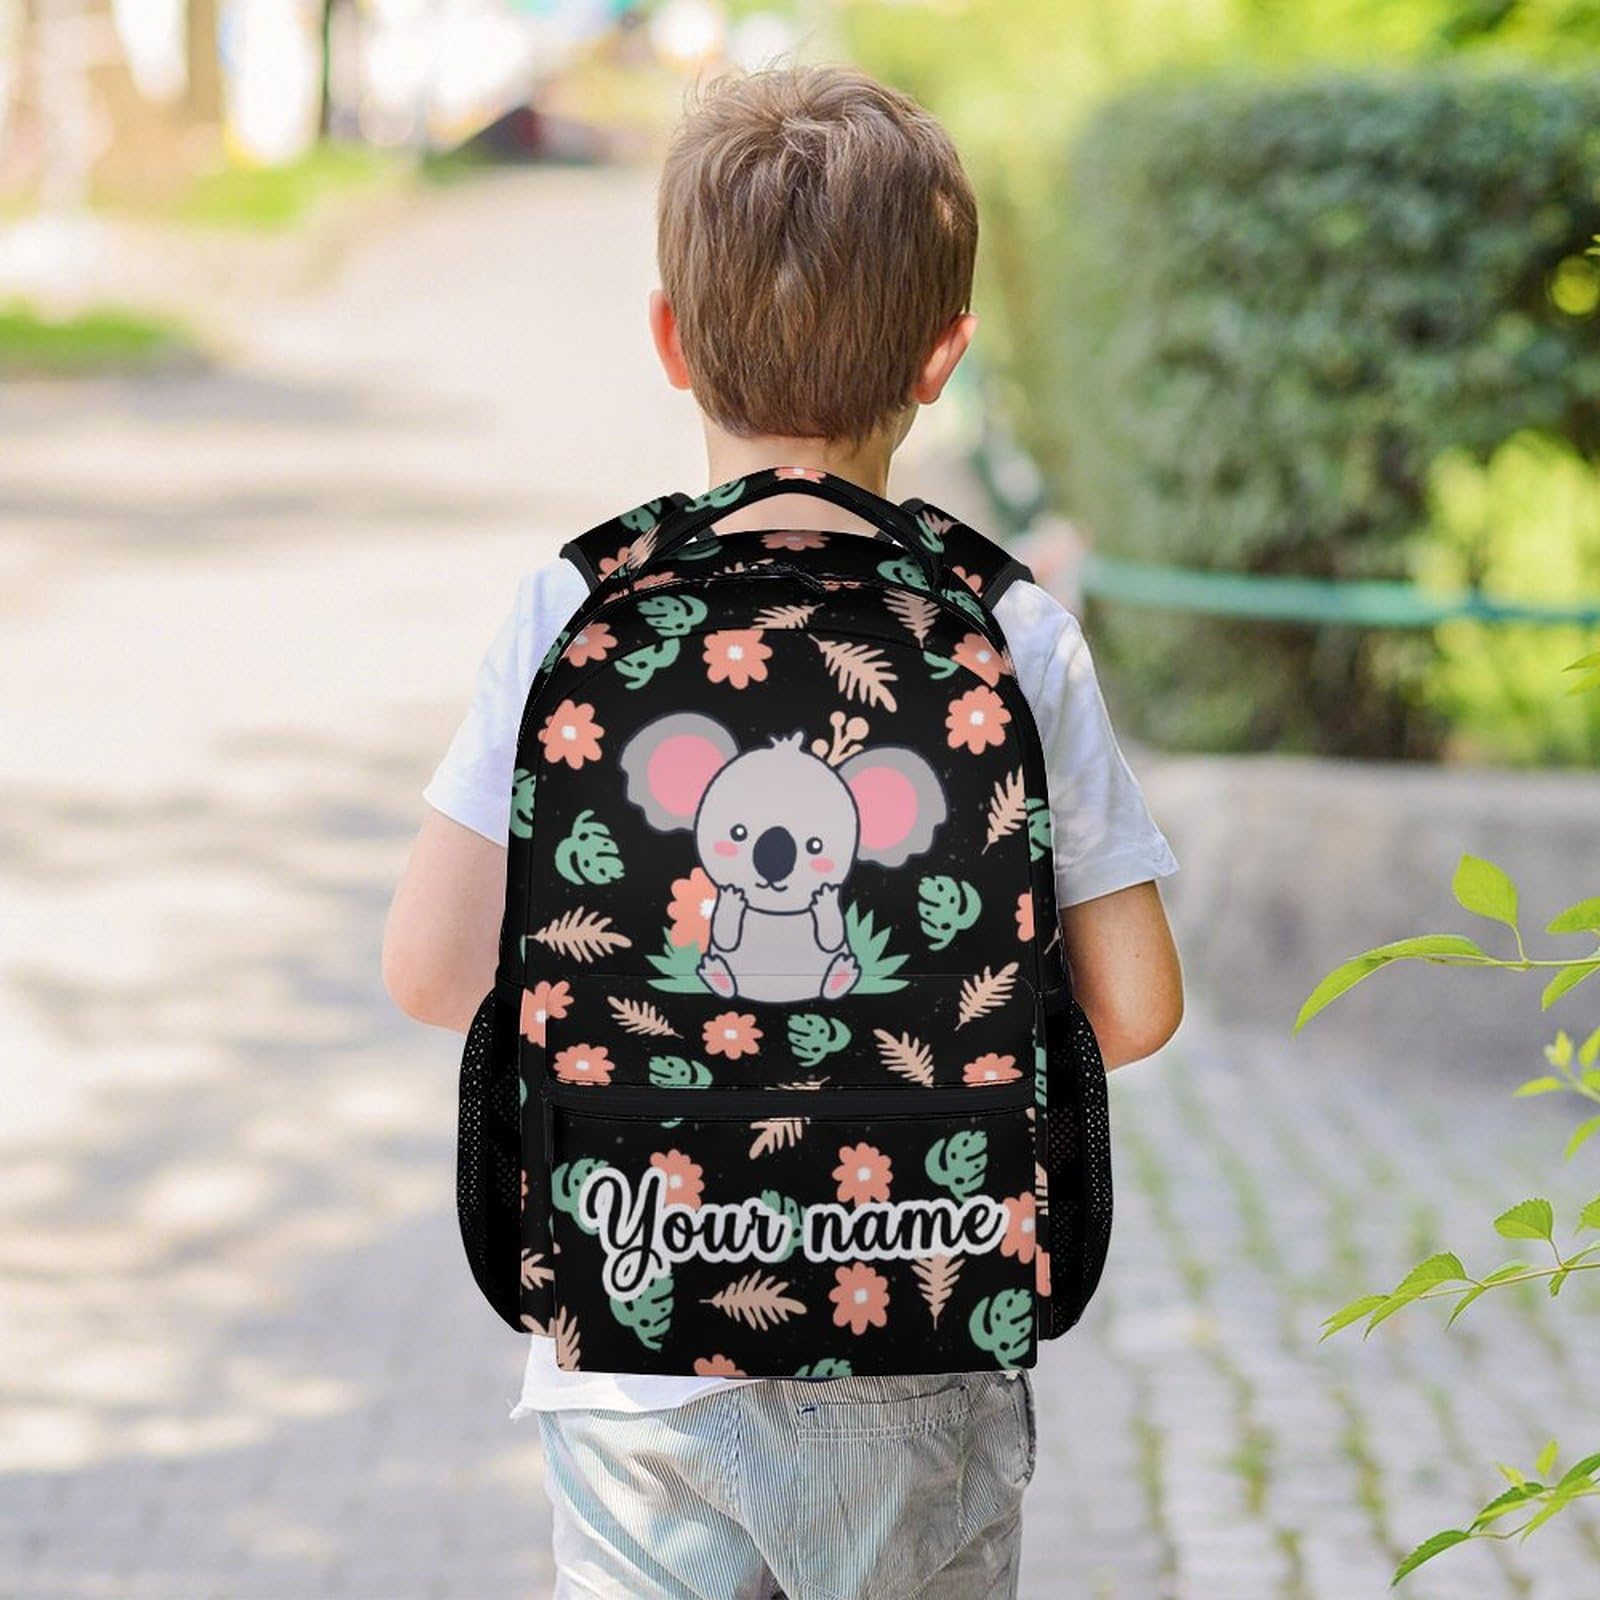 AIOMXZZ Personalized Koala Backpack Gifts with Text Name, 16 Inch Cute Koala Bookbag Durable, Lightweight, Large Capacity, Funny Animal Backpack for School Girls Kids Women